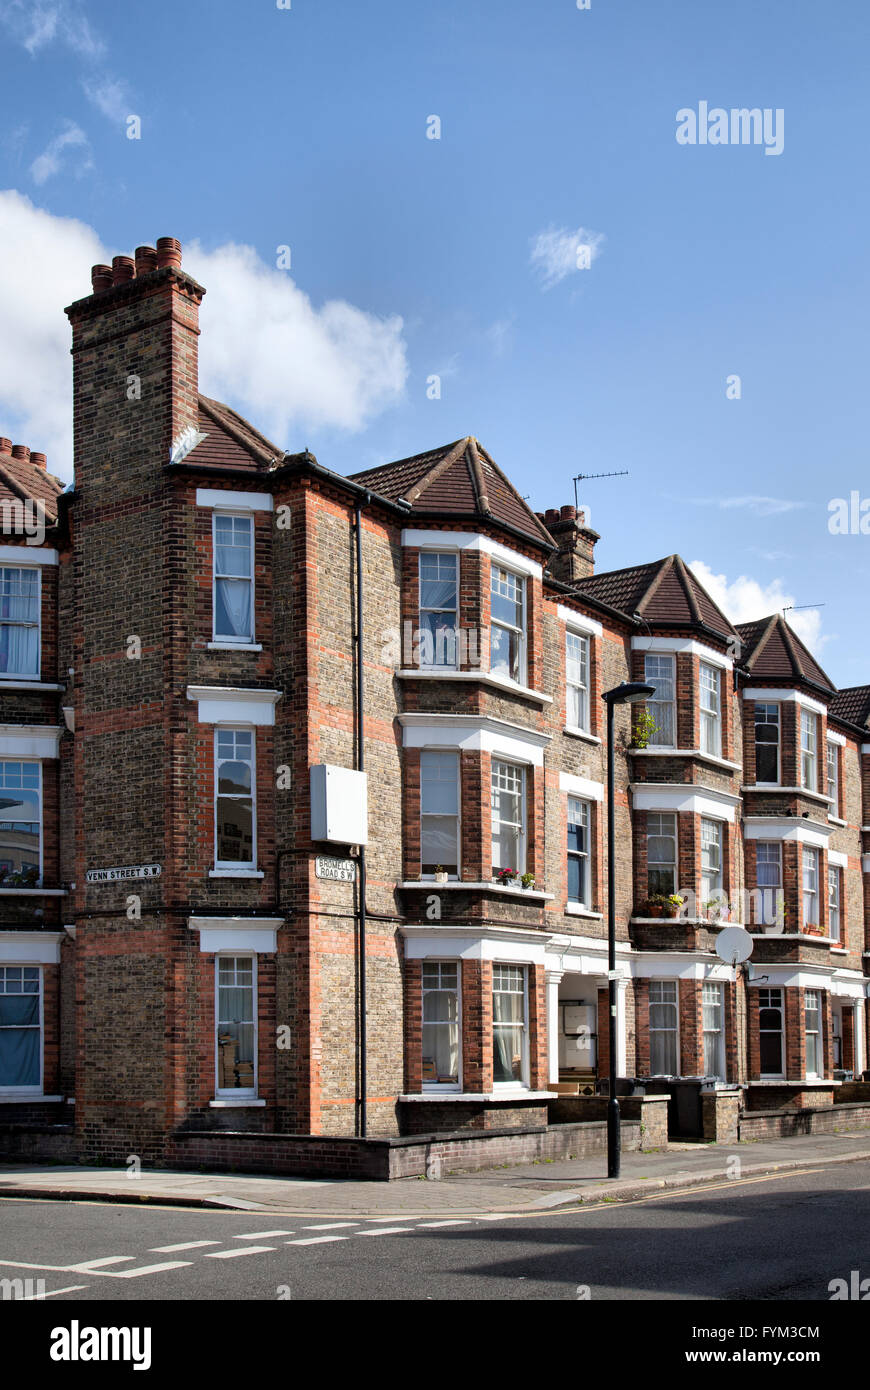 Property on Venn and Bromells Rd in Clapham  -  London UK Stock Photo